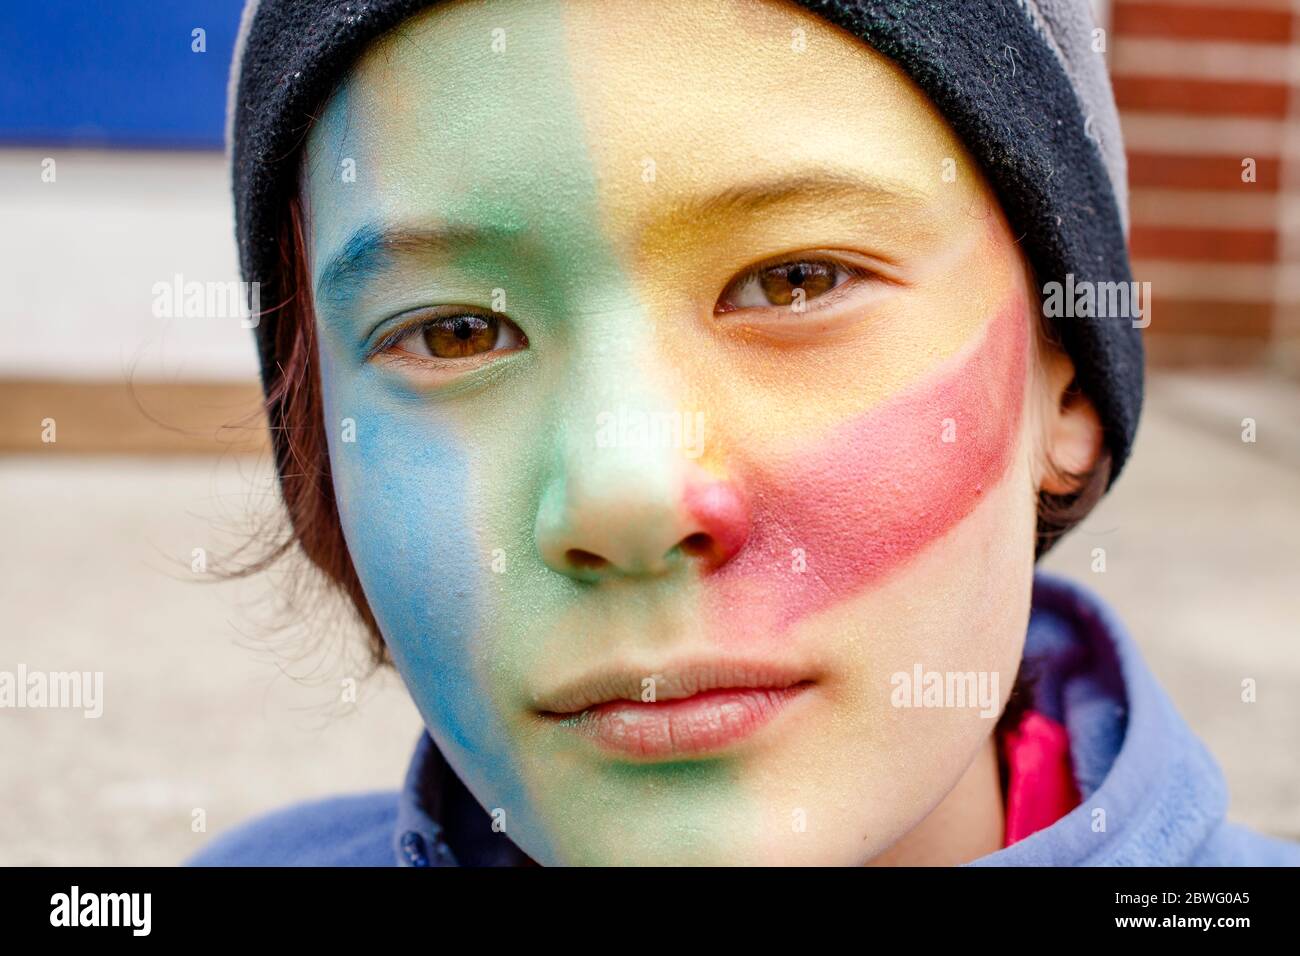 Portrait of beautiful boy with colorful face paint and direct gaze Stock Photo